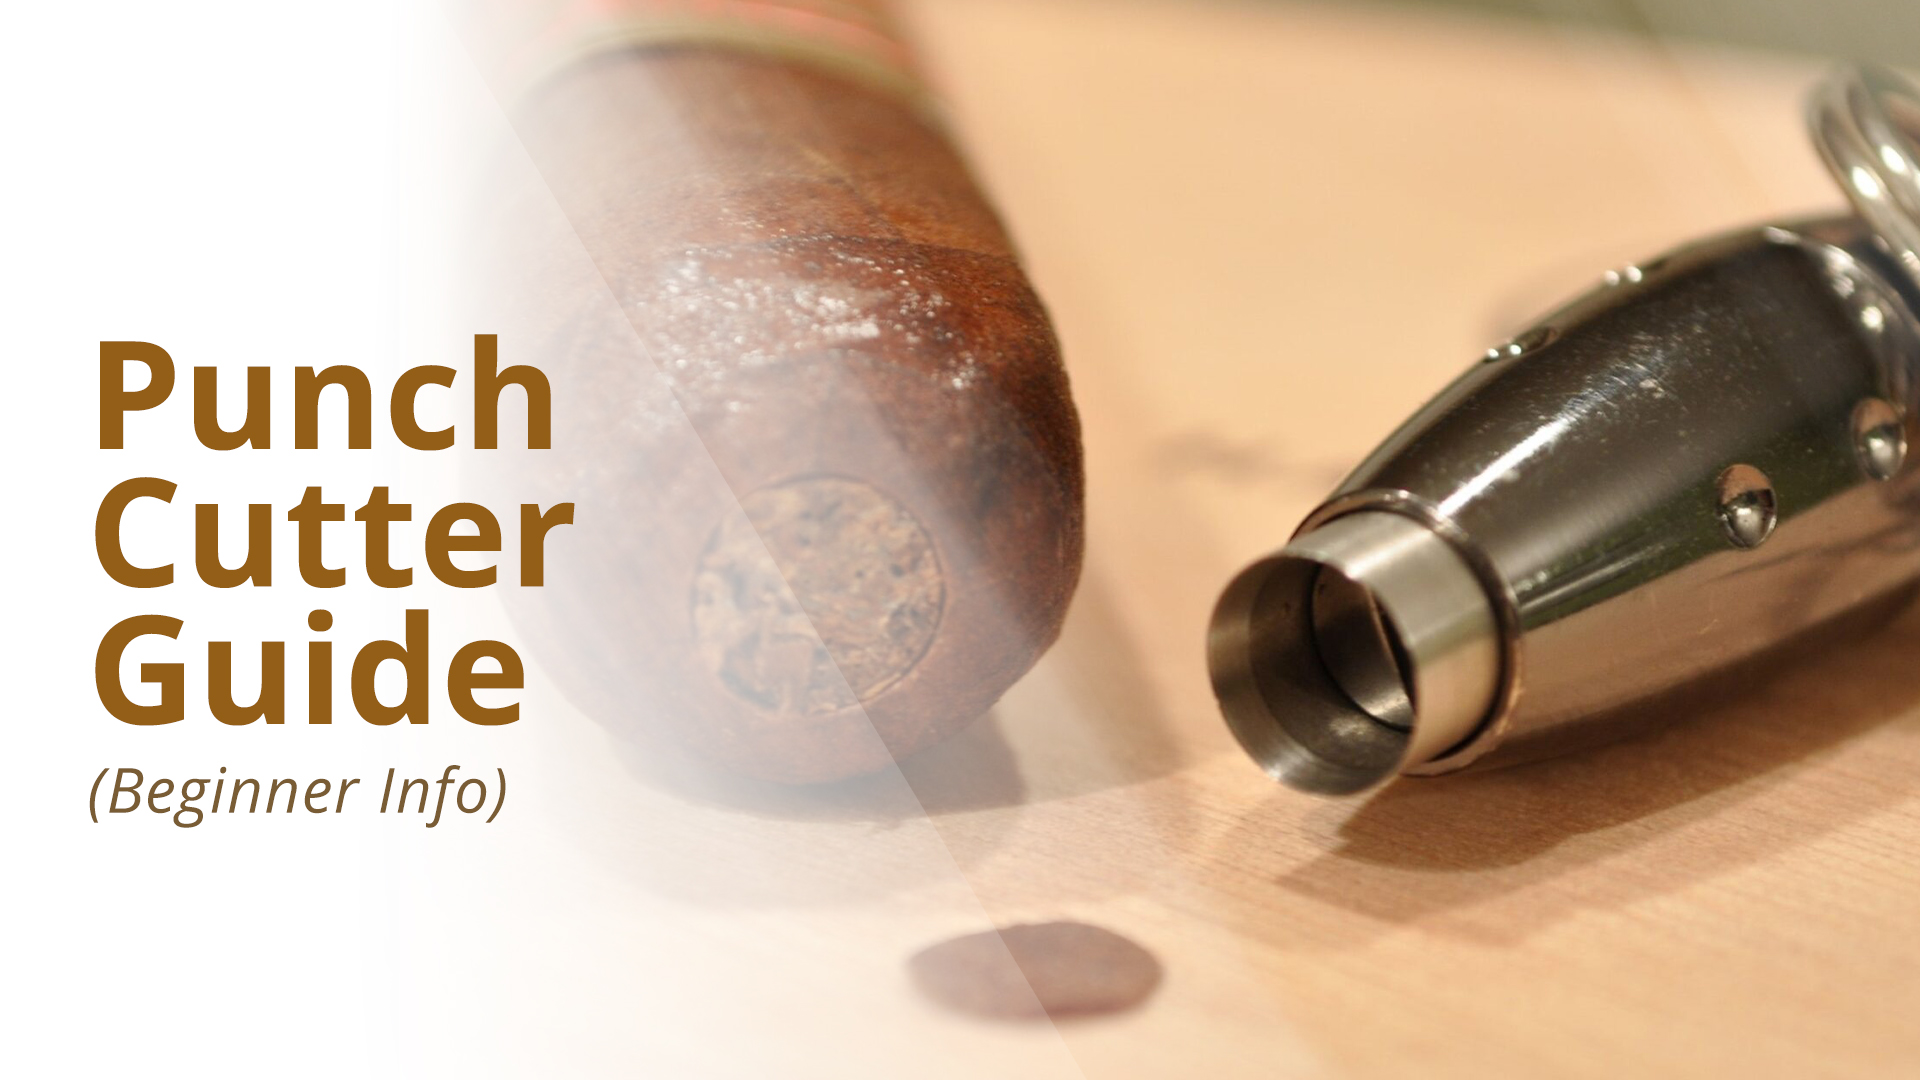 How to use cigar punch cutter